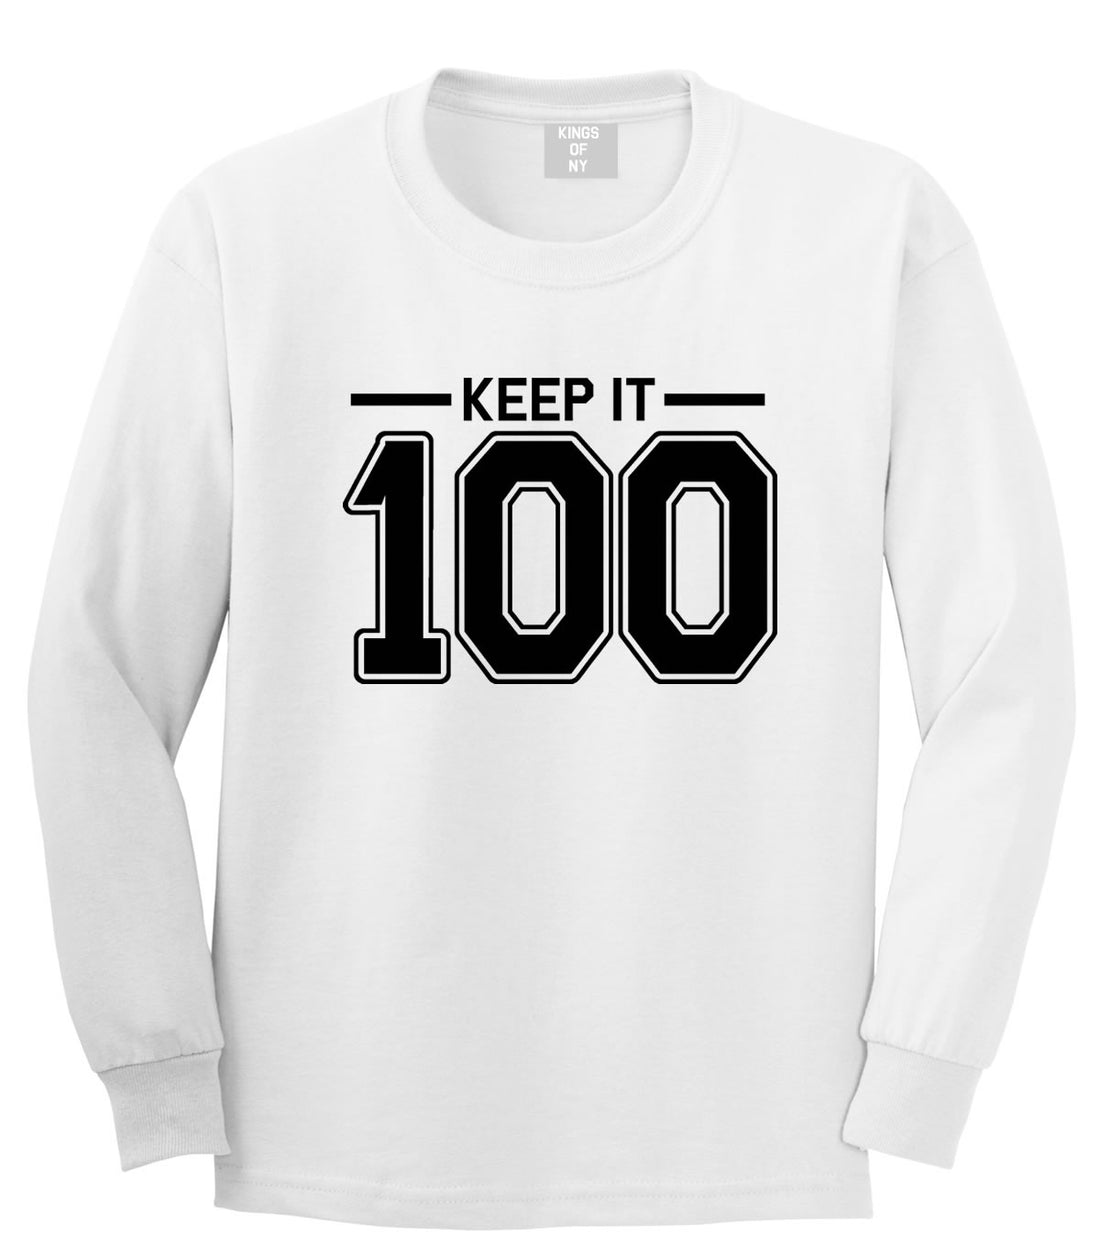 Keep It 100 Long Sleeve T-Shirt in White by Kings Of NY